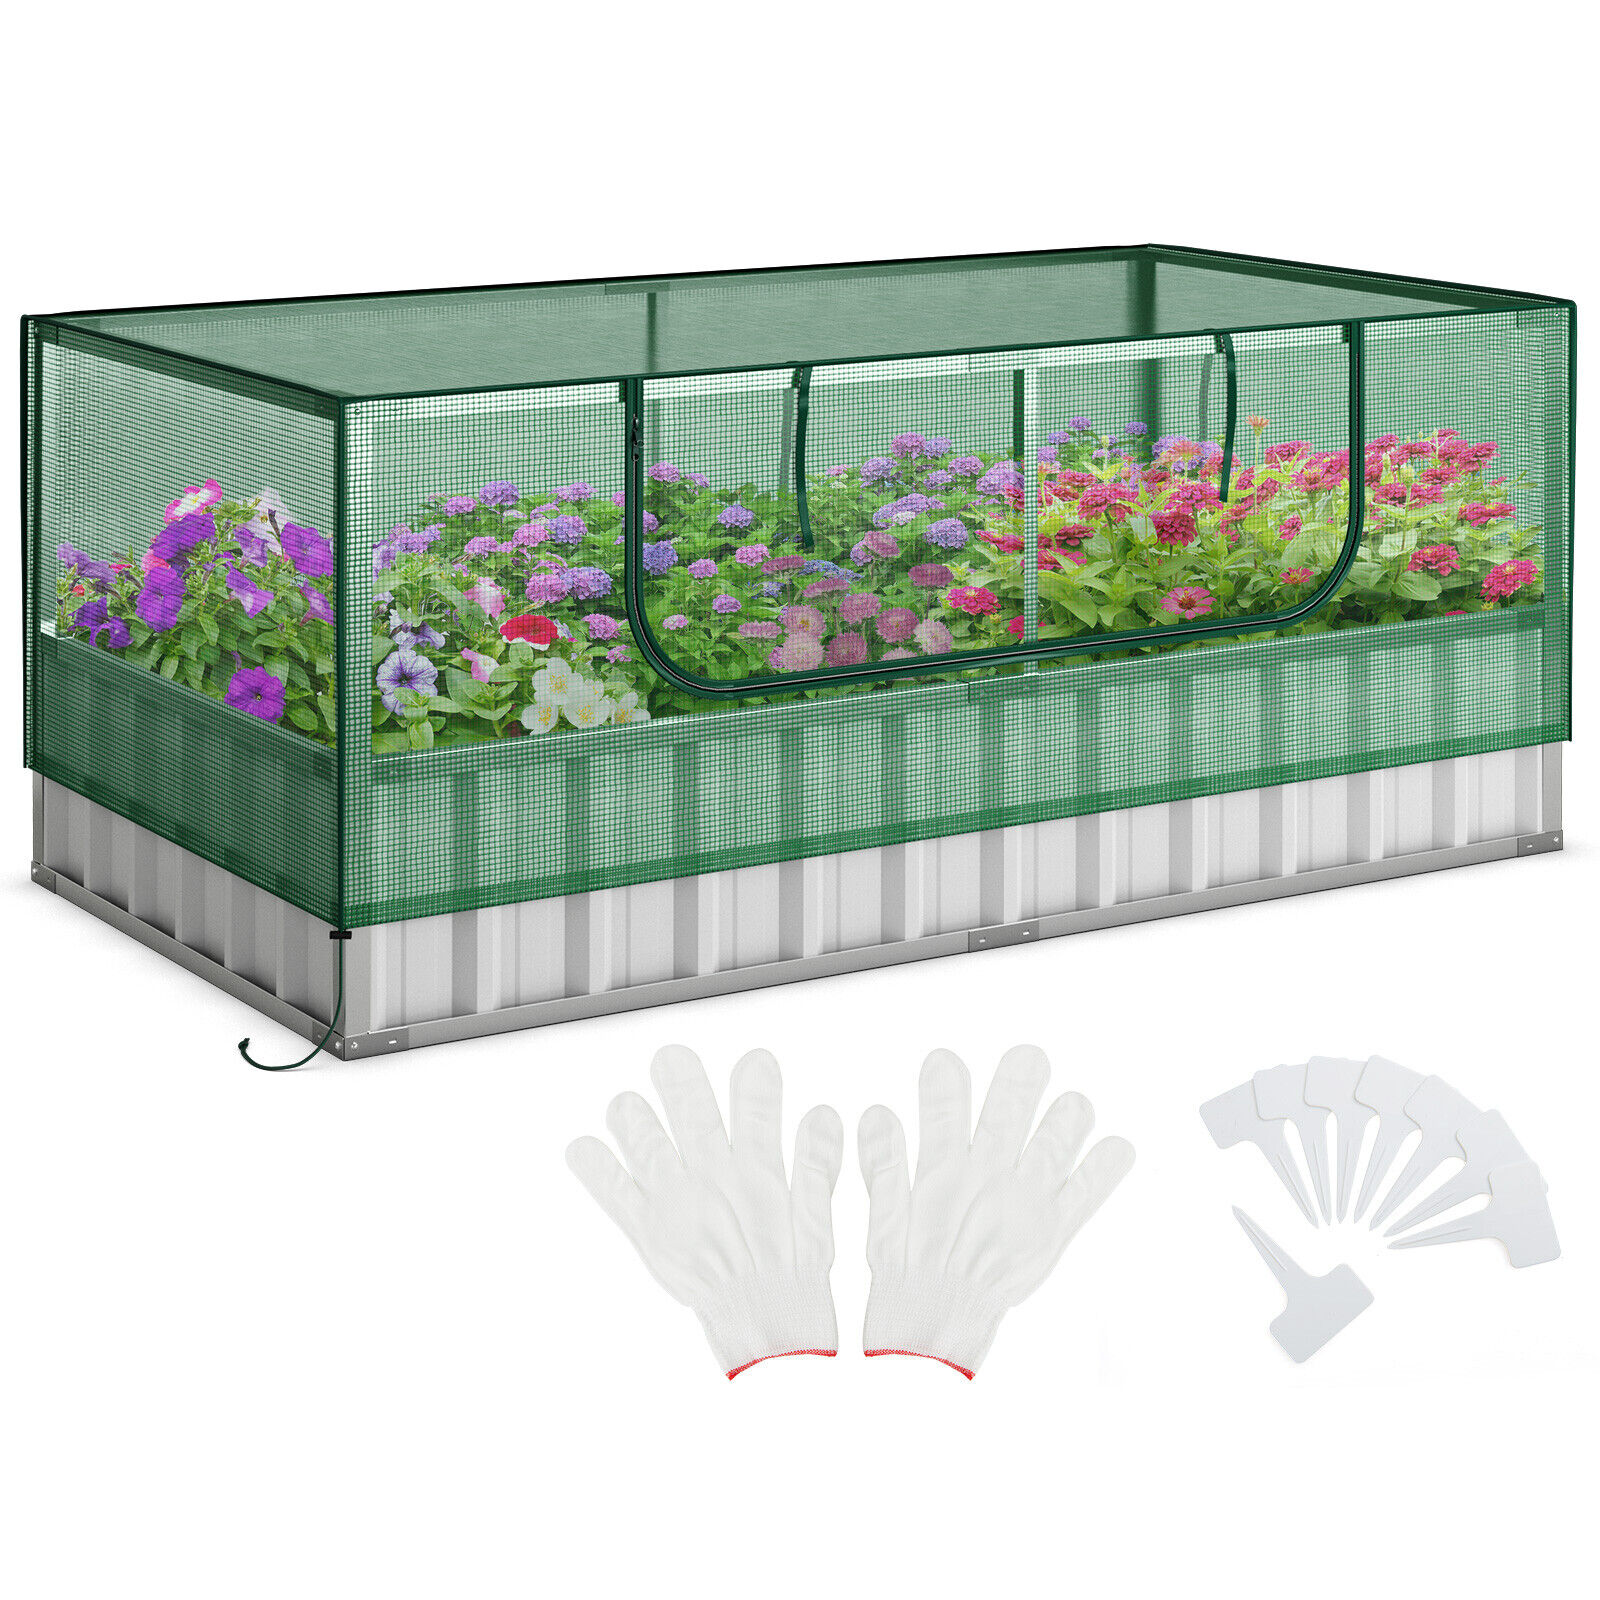 69" x 36" x 28" Galvanized Raised Garden Bed w/ Cover Roll-up Window Greenhouse